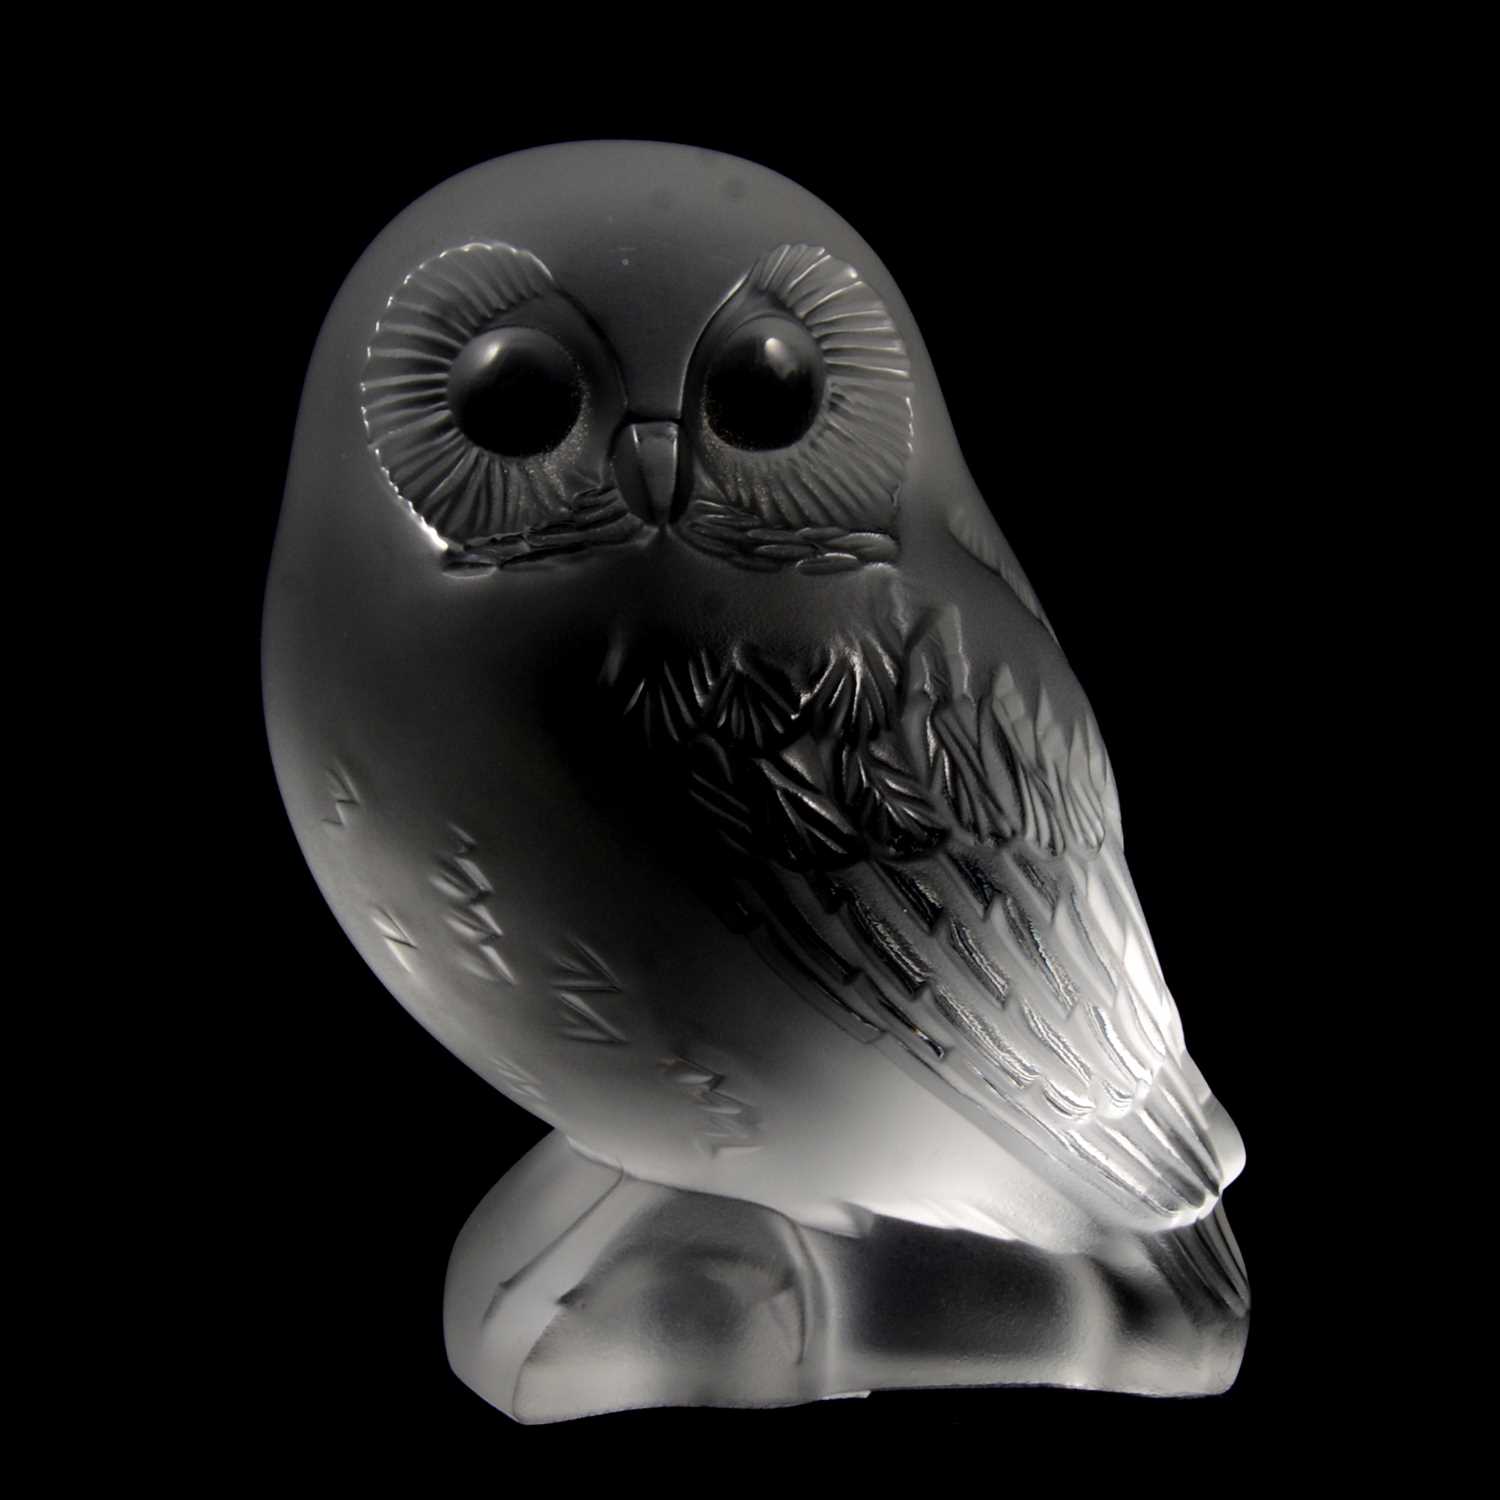 Lalique Crystal, a 'Shivers Owl' glass paperweight